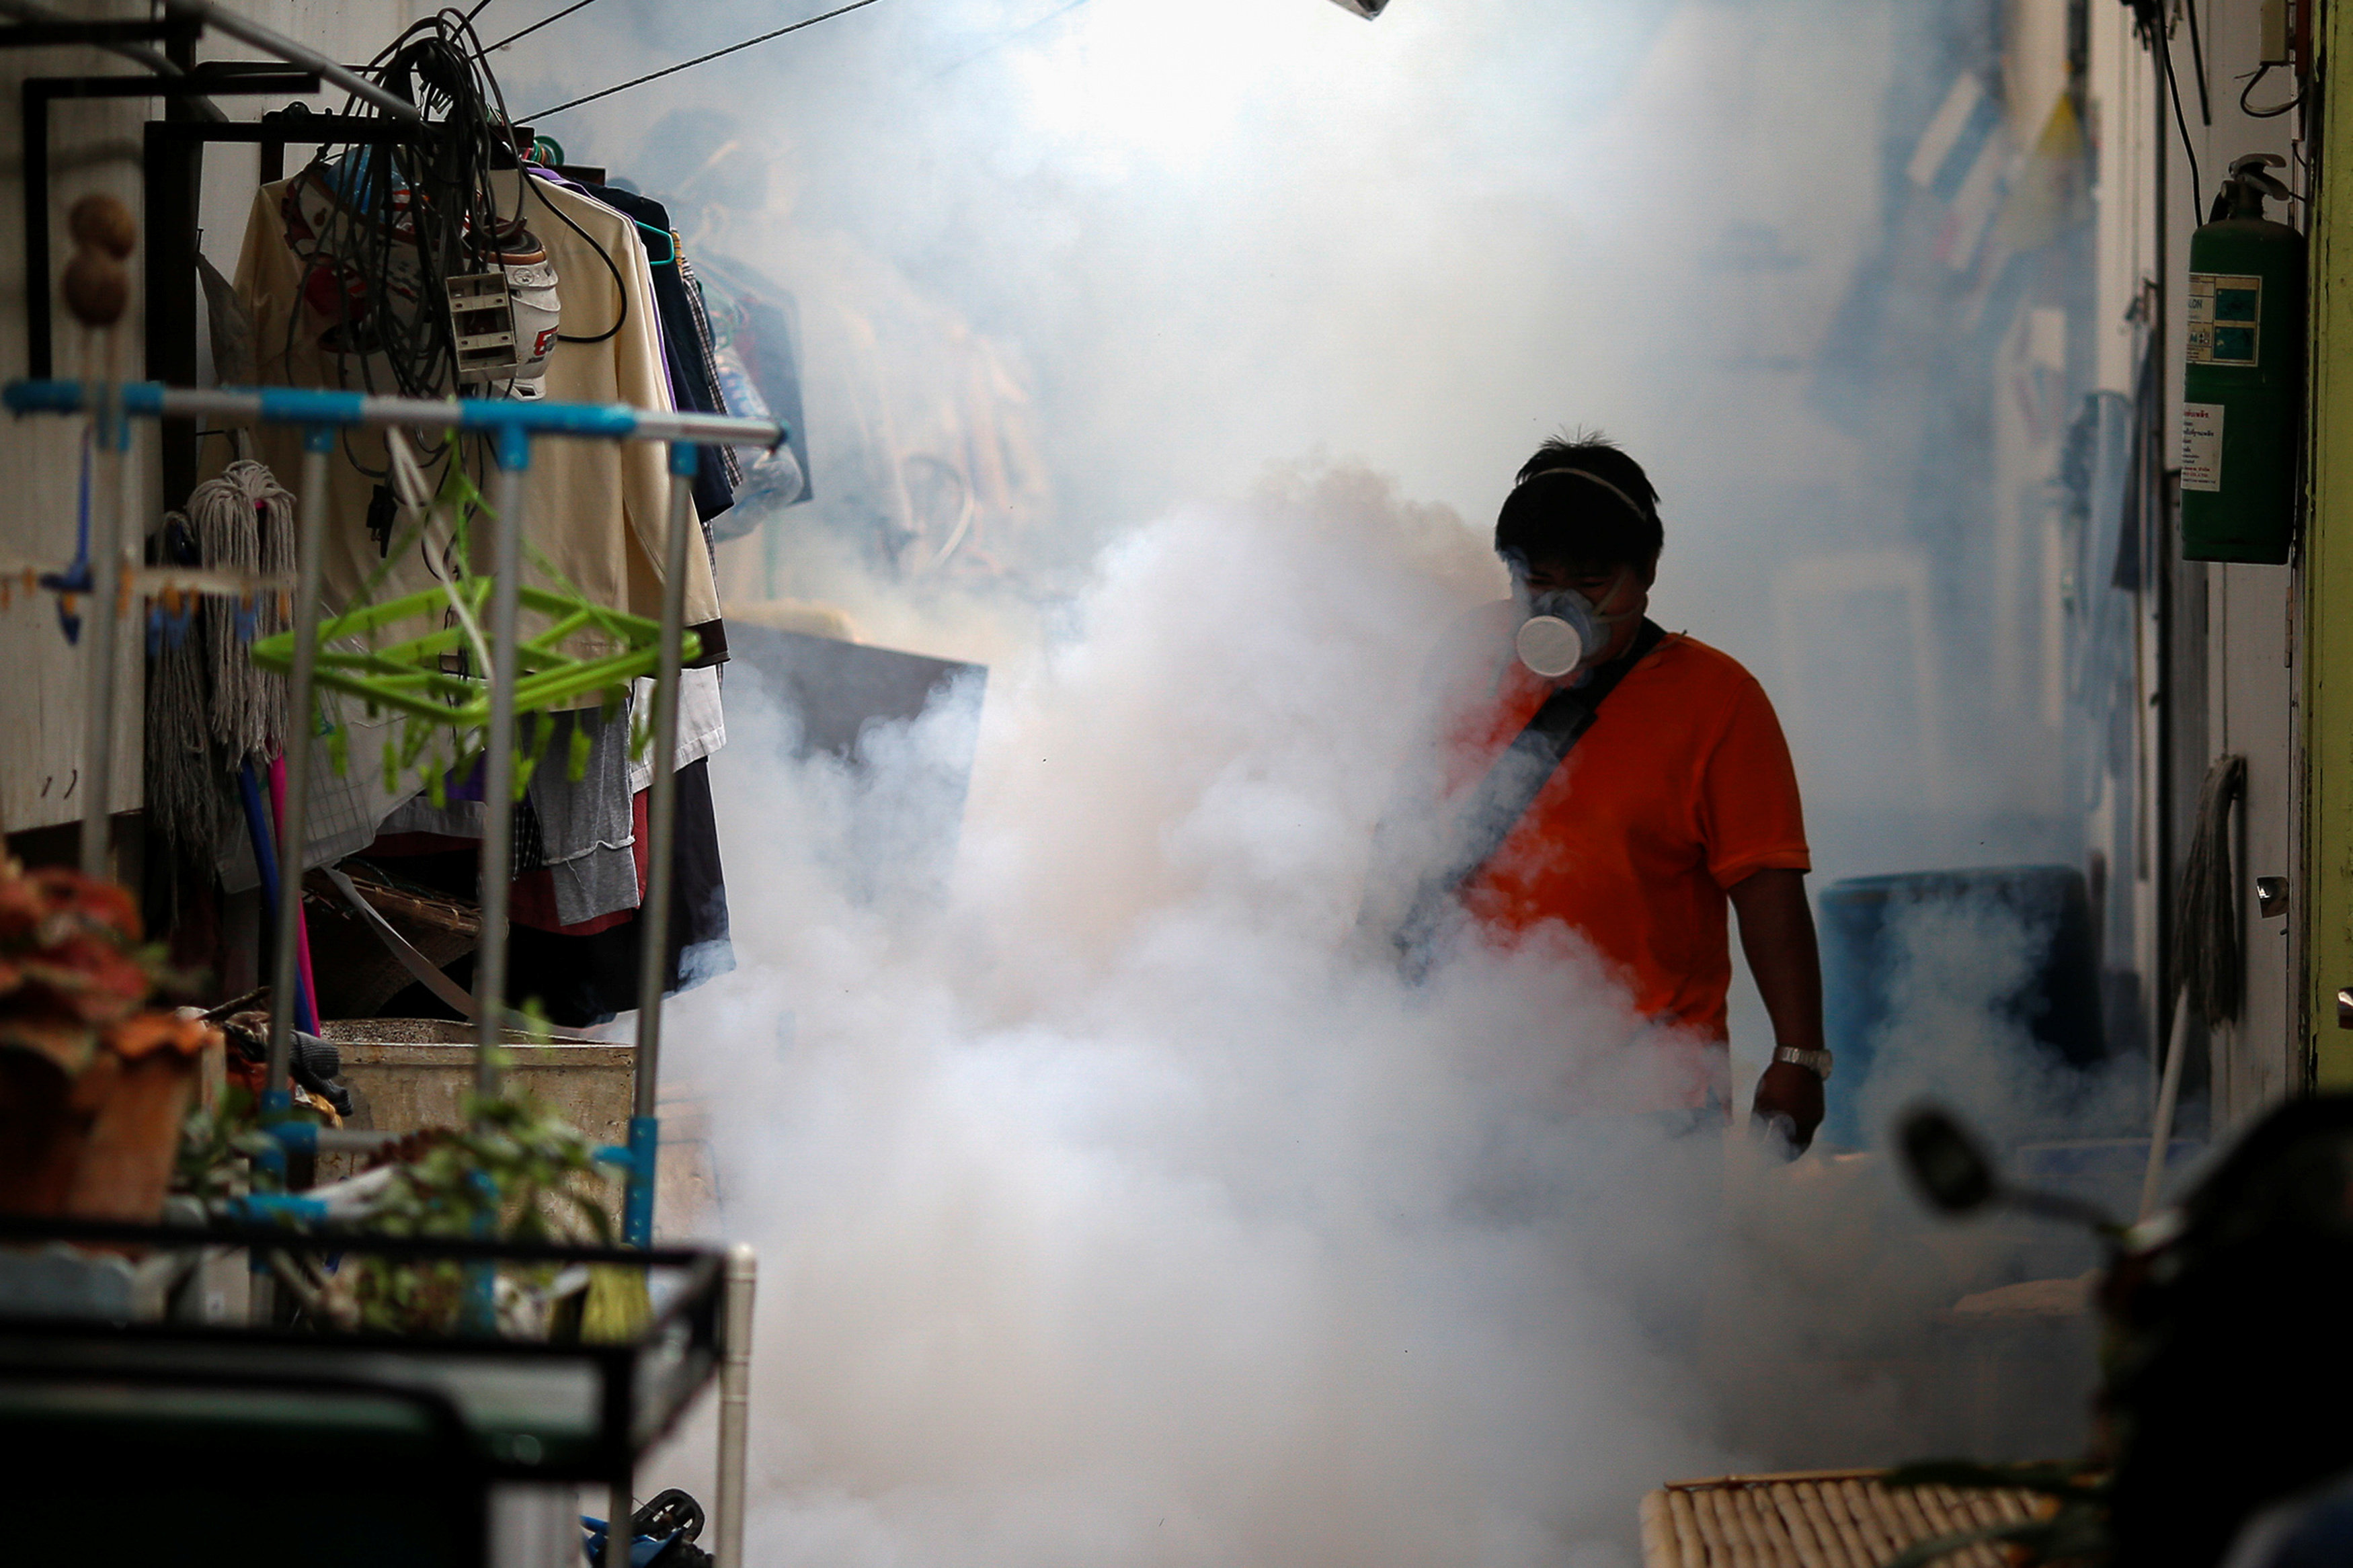 Thailand rules out Zika link in two microcephaly cases